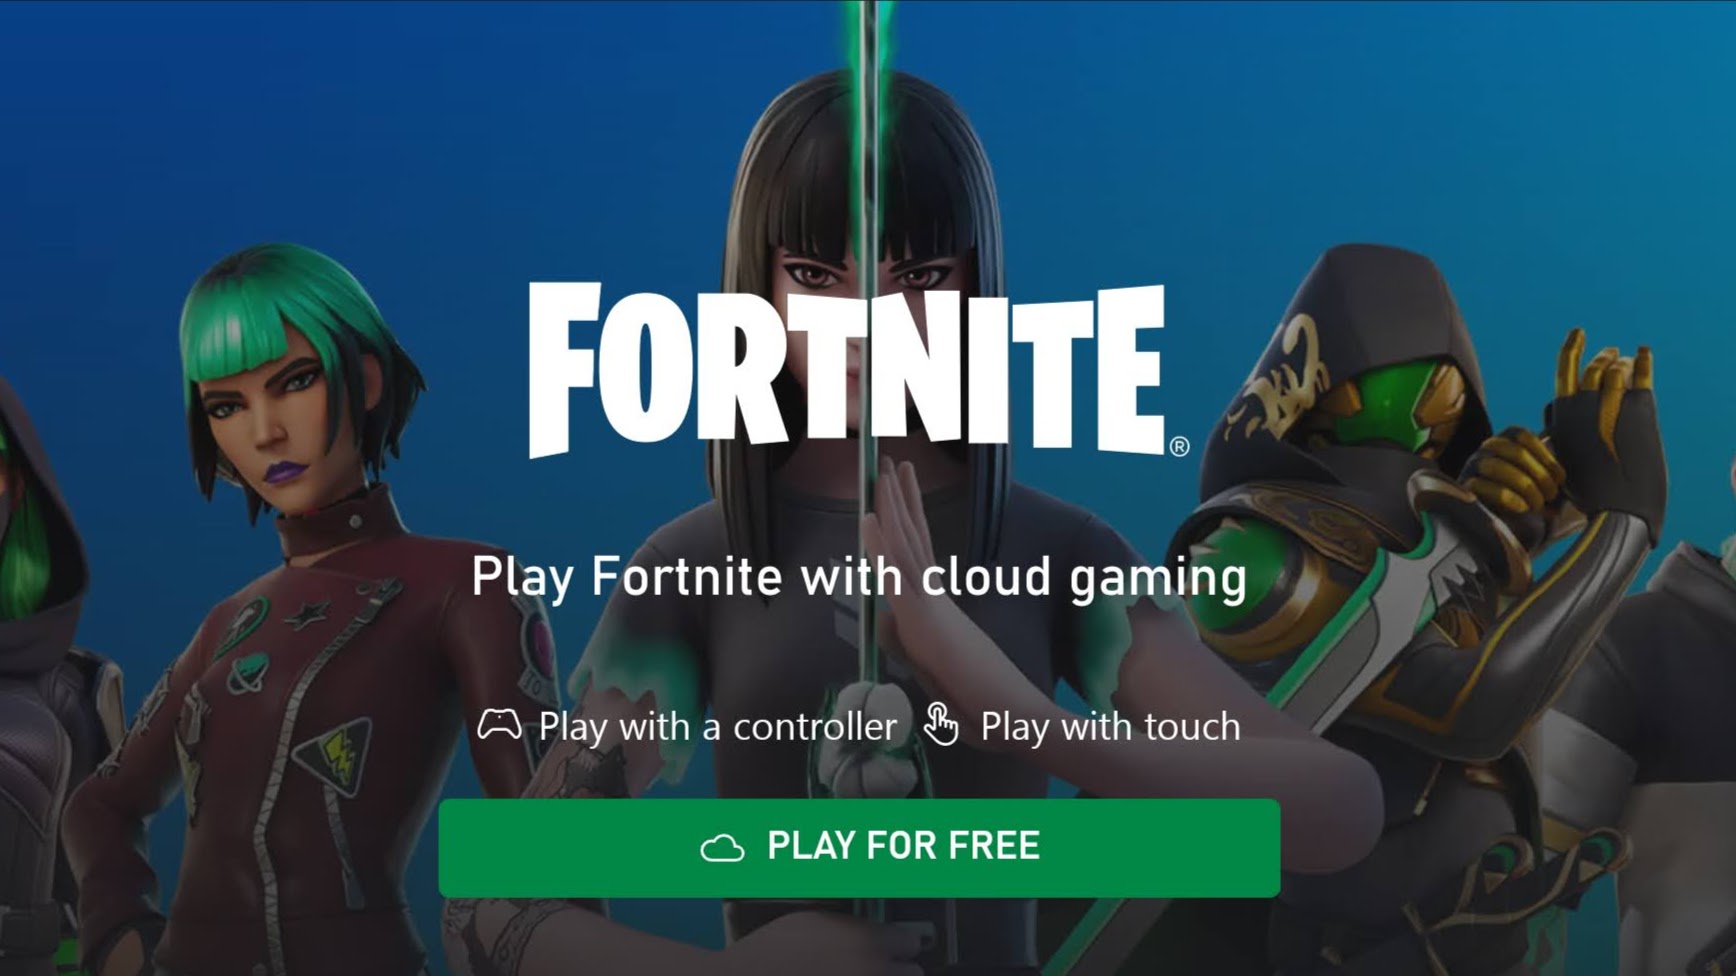 A screenshot of a Fortnite splash screen with a button at the bottom that says 